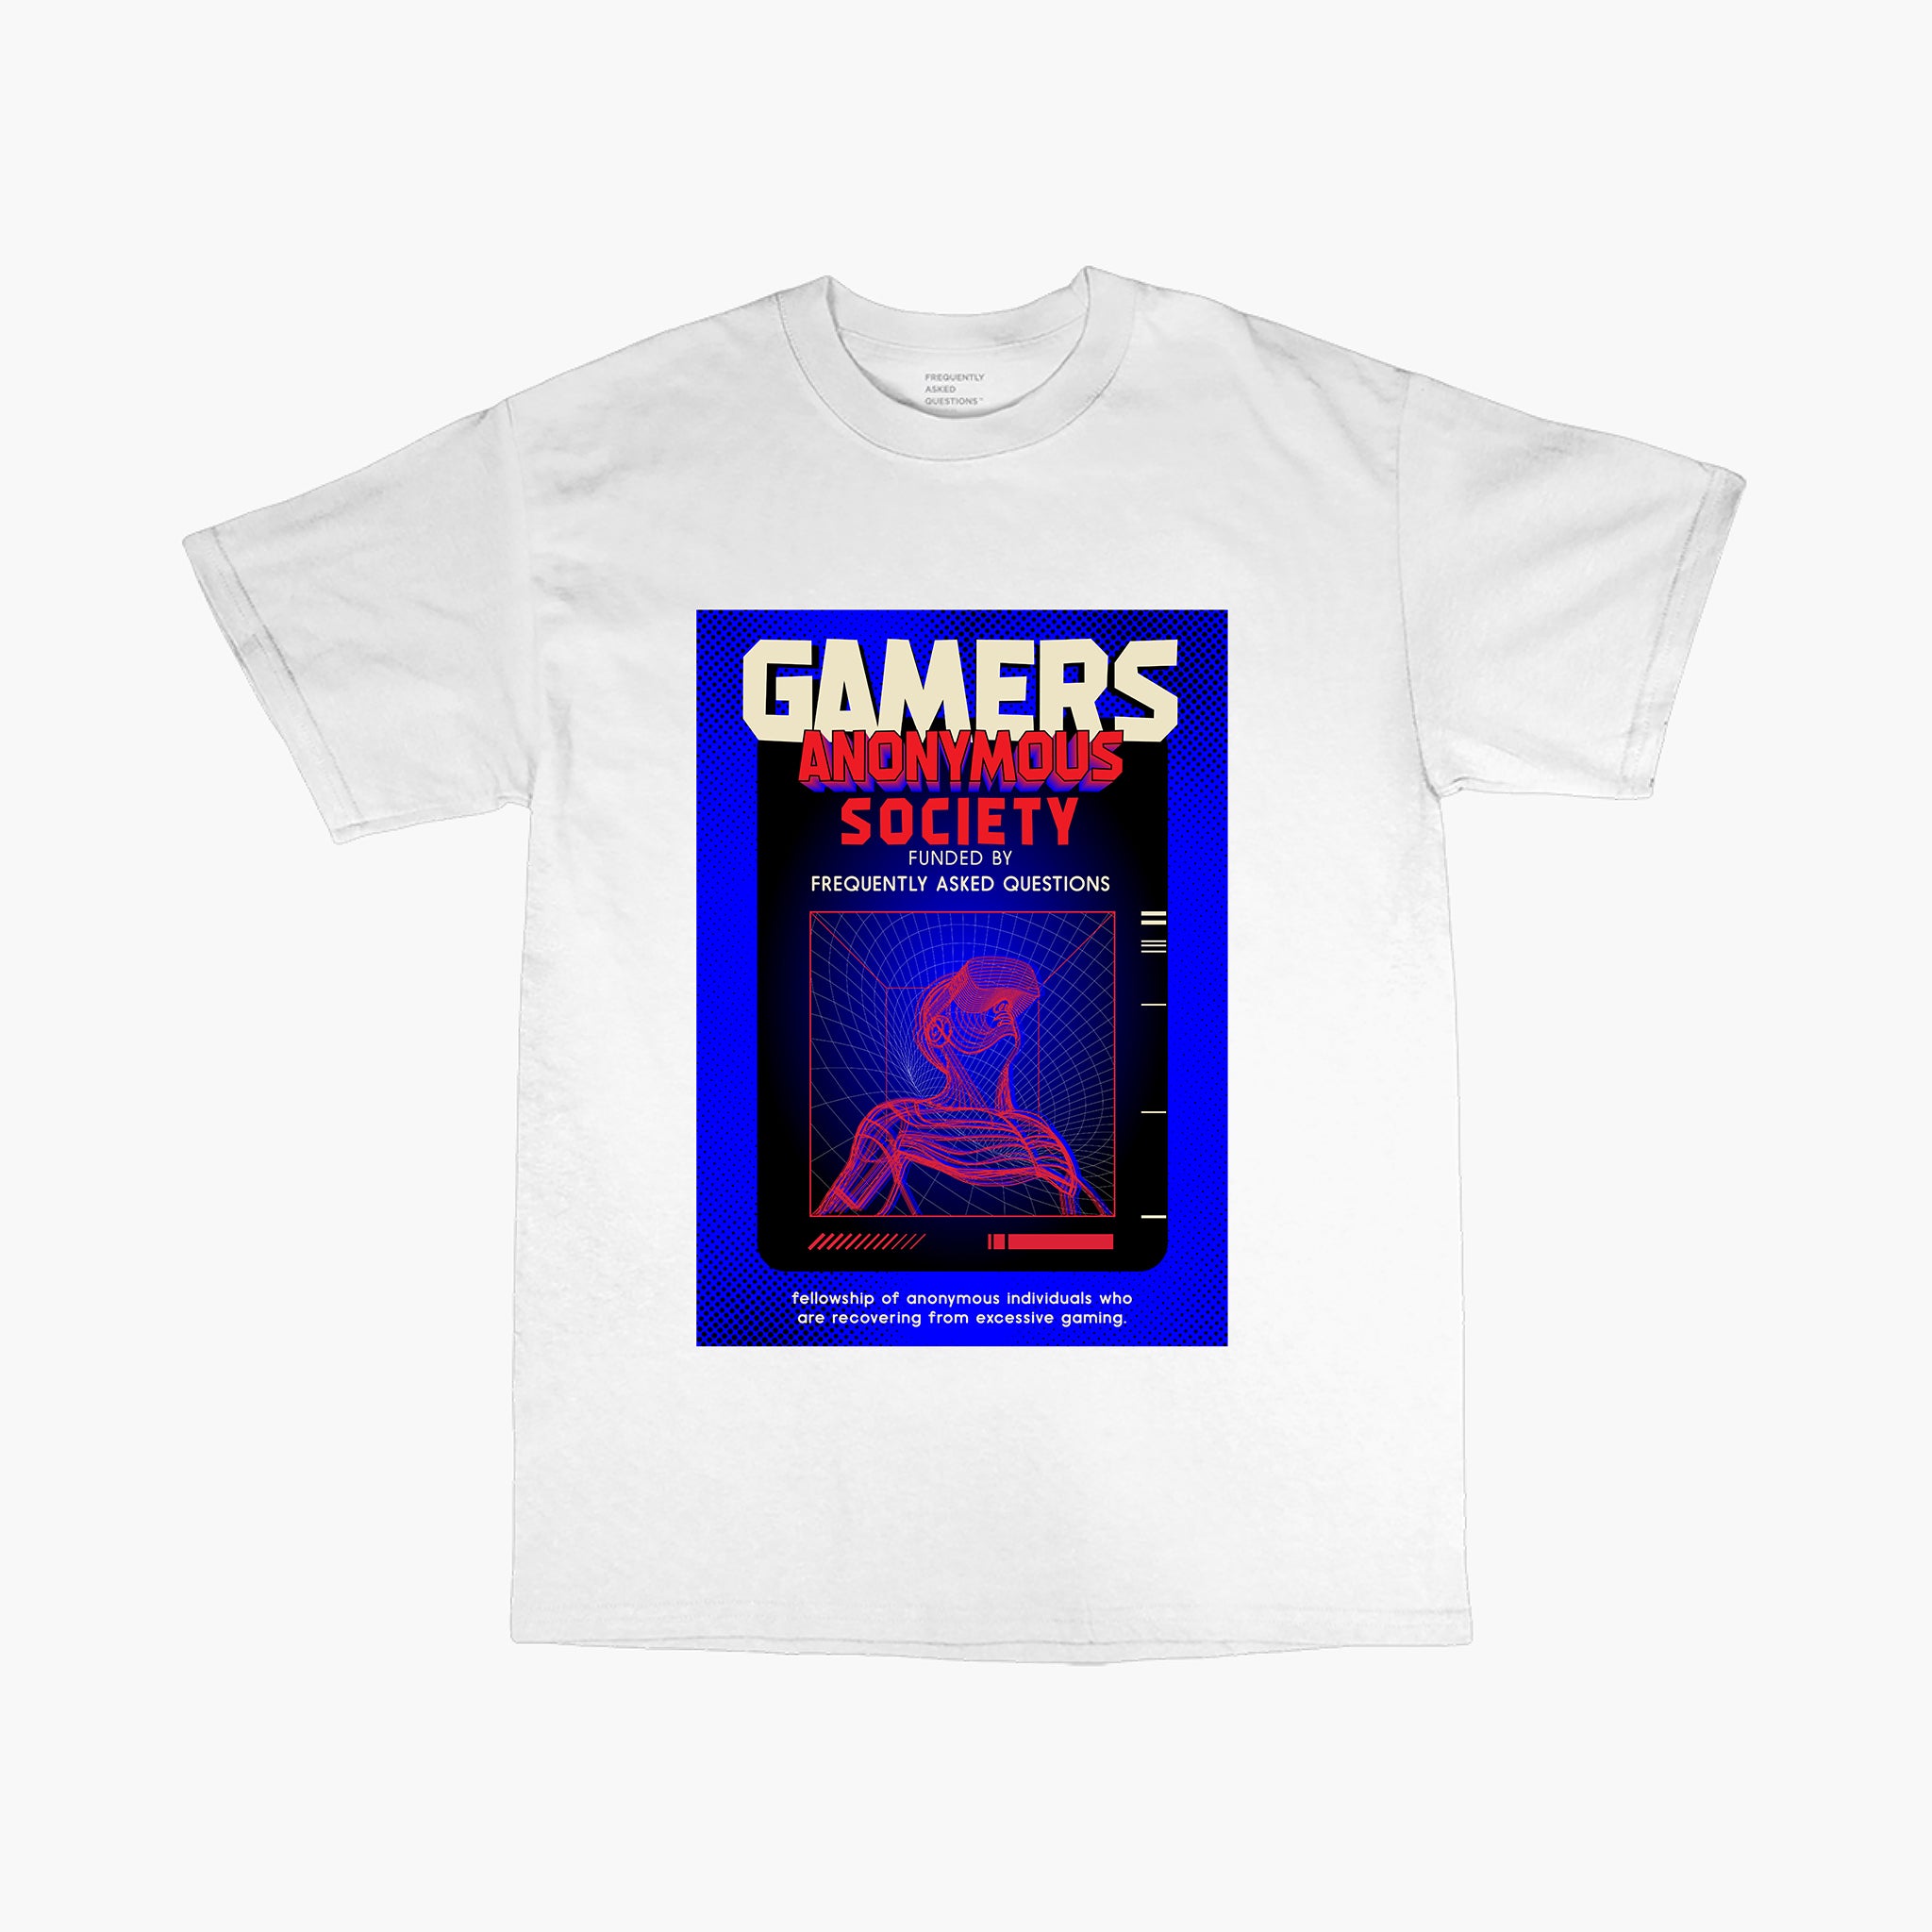 Gamers Anonymous T-Shirt - Frequently Asked Questions